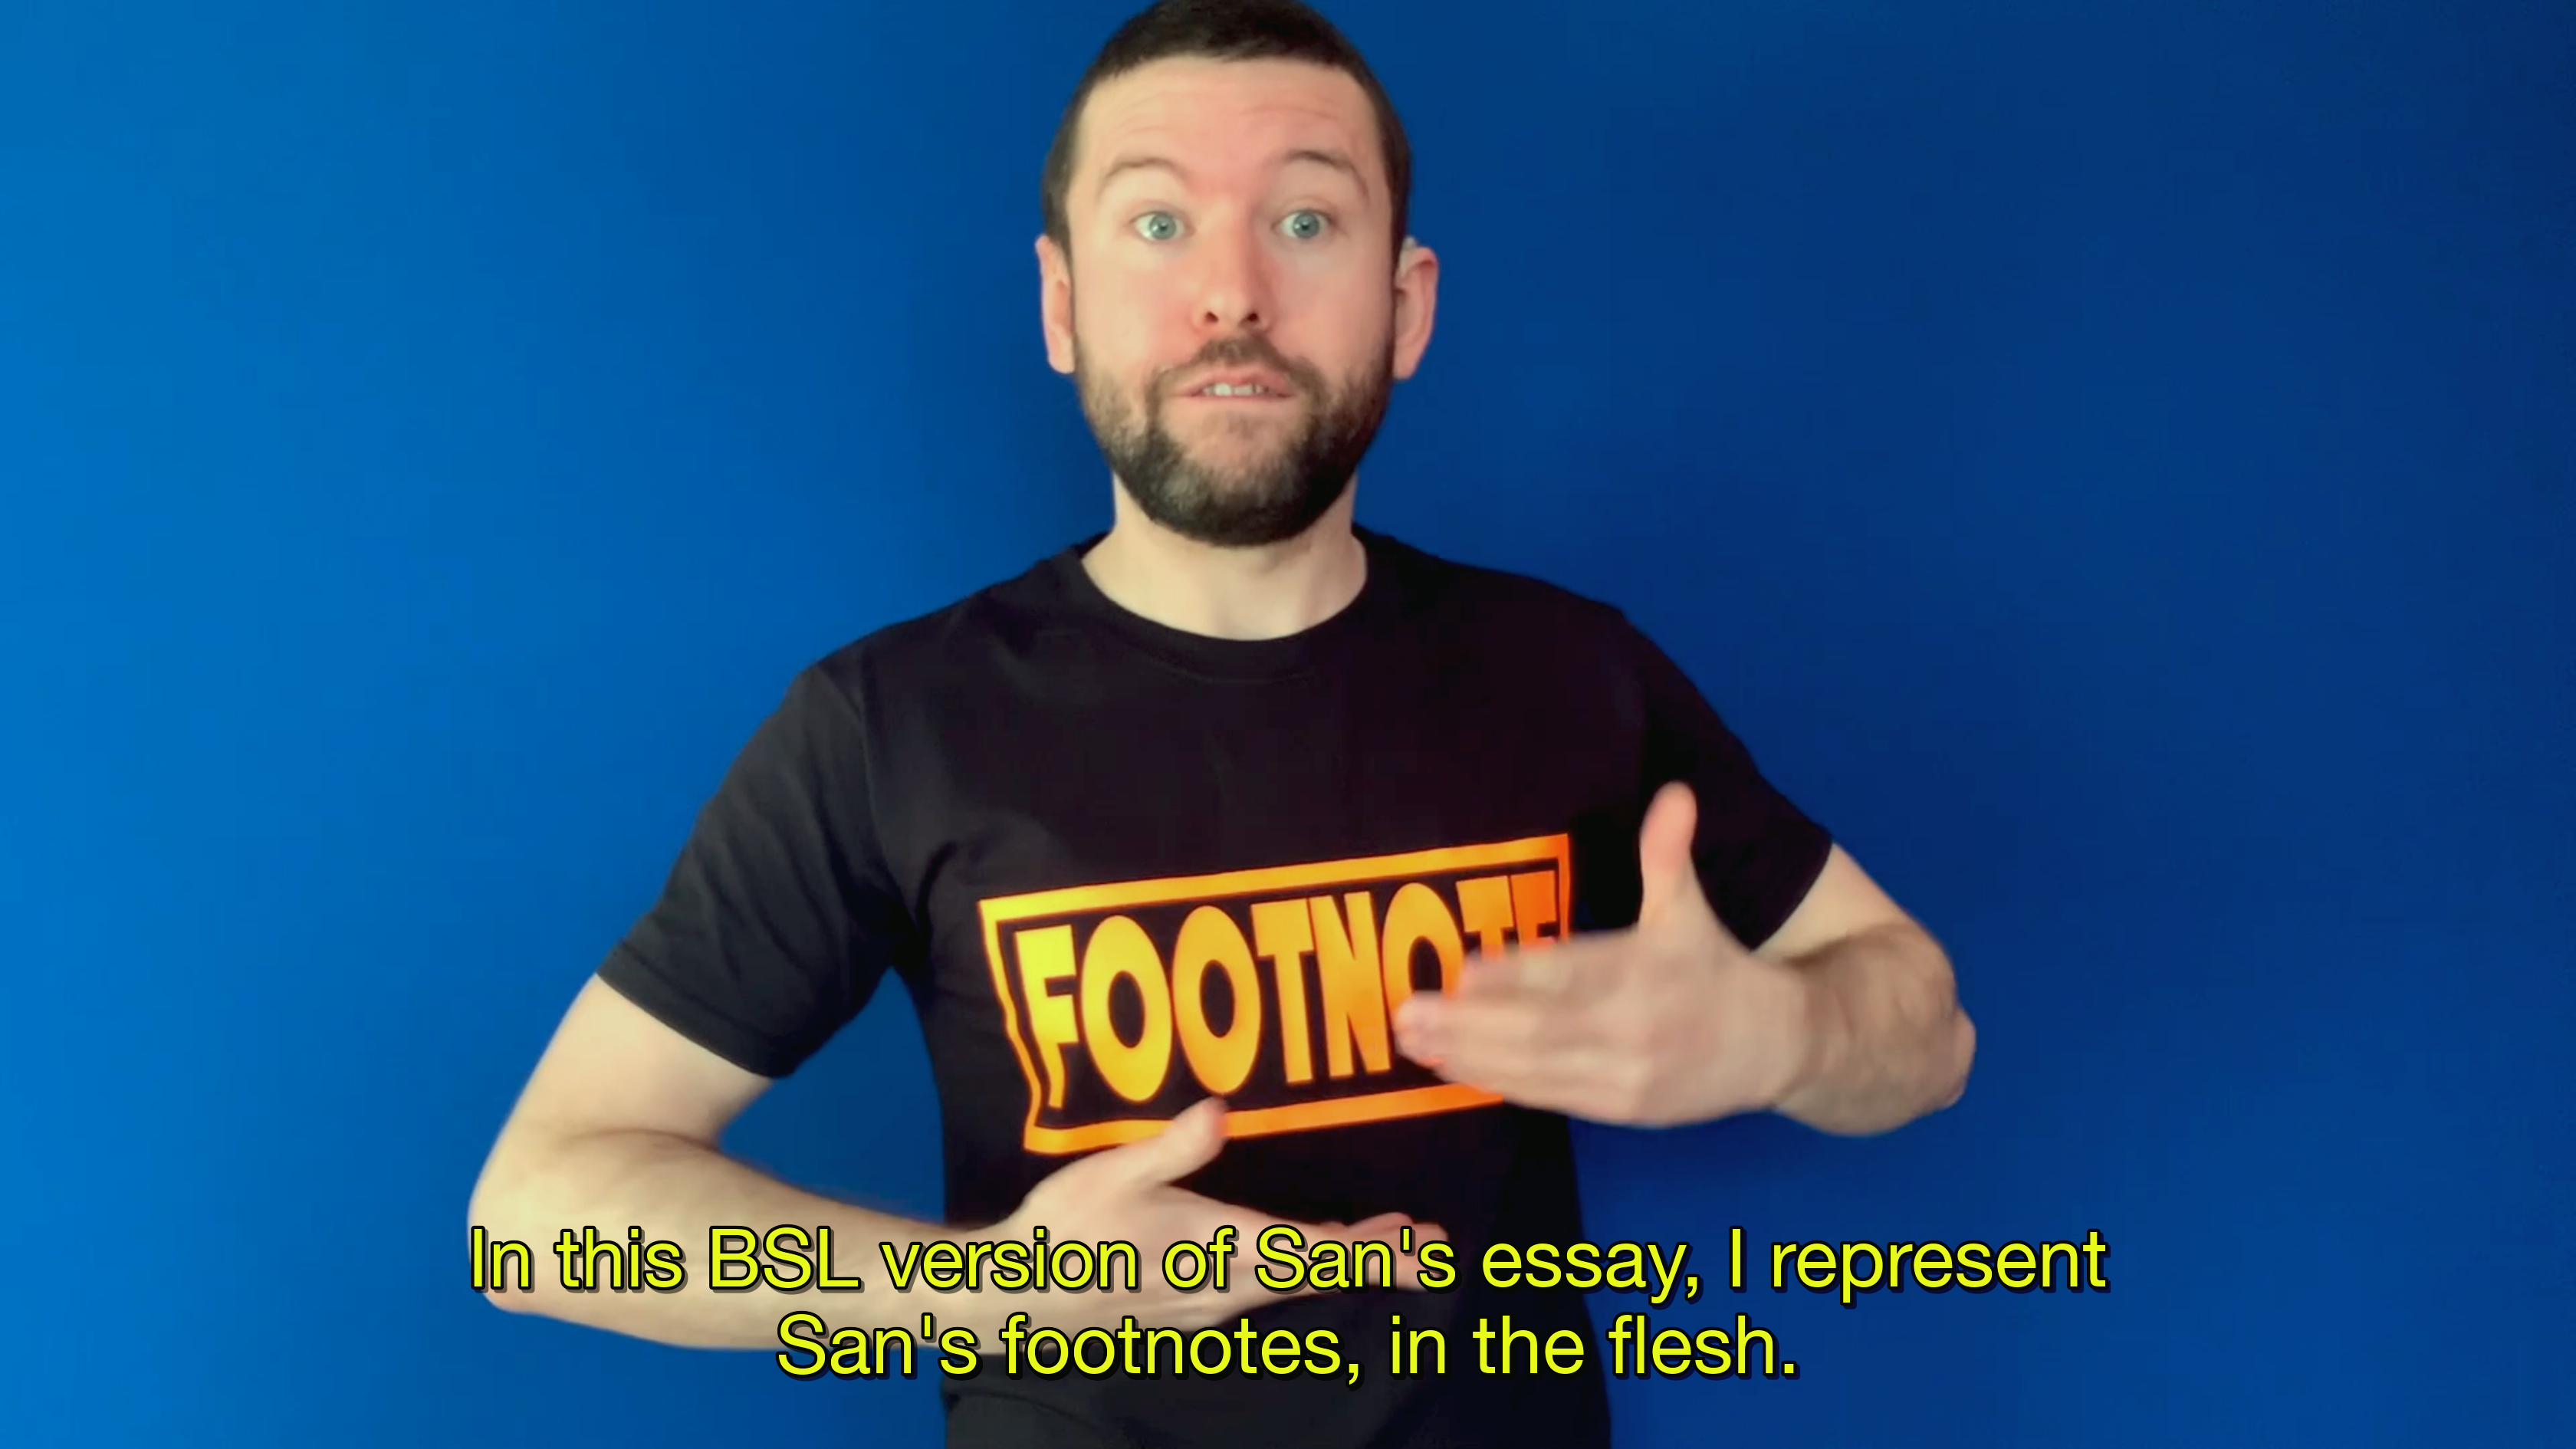 A video still from San Alland's essay, of a white deaf person who stands in front of a bright blue wall. He's wearing a black t-shirt that says "Footnote" in bright orange letters. Yellow captions say: 'In this BSL version of San's essay, I represent San's footnotes, in the flesh.'